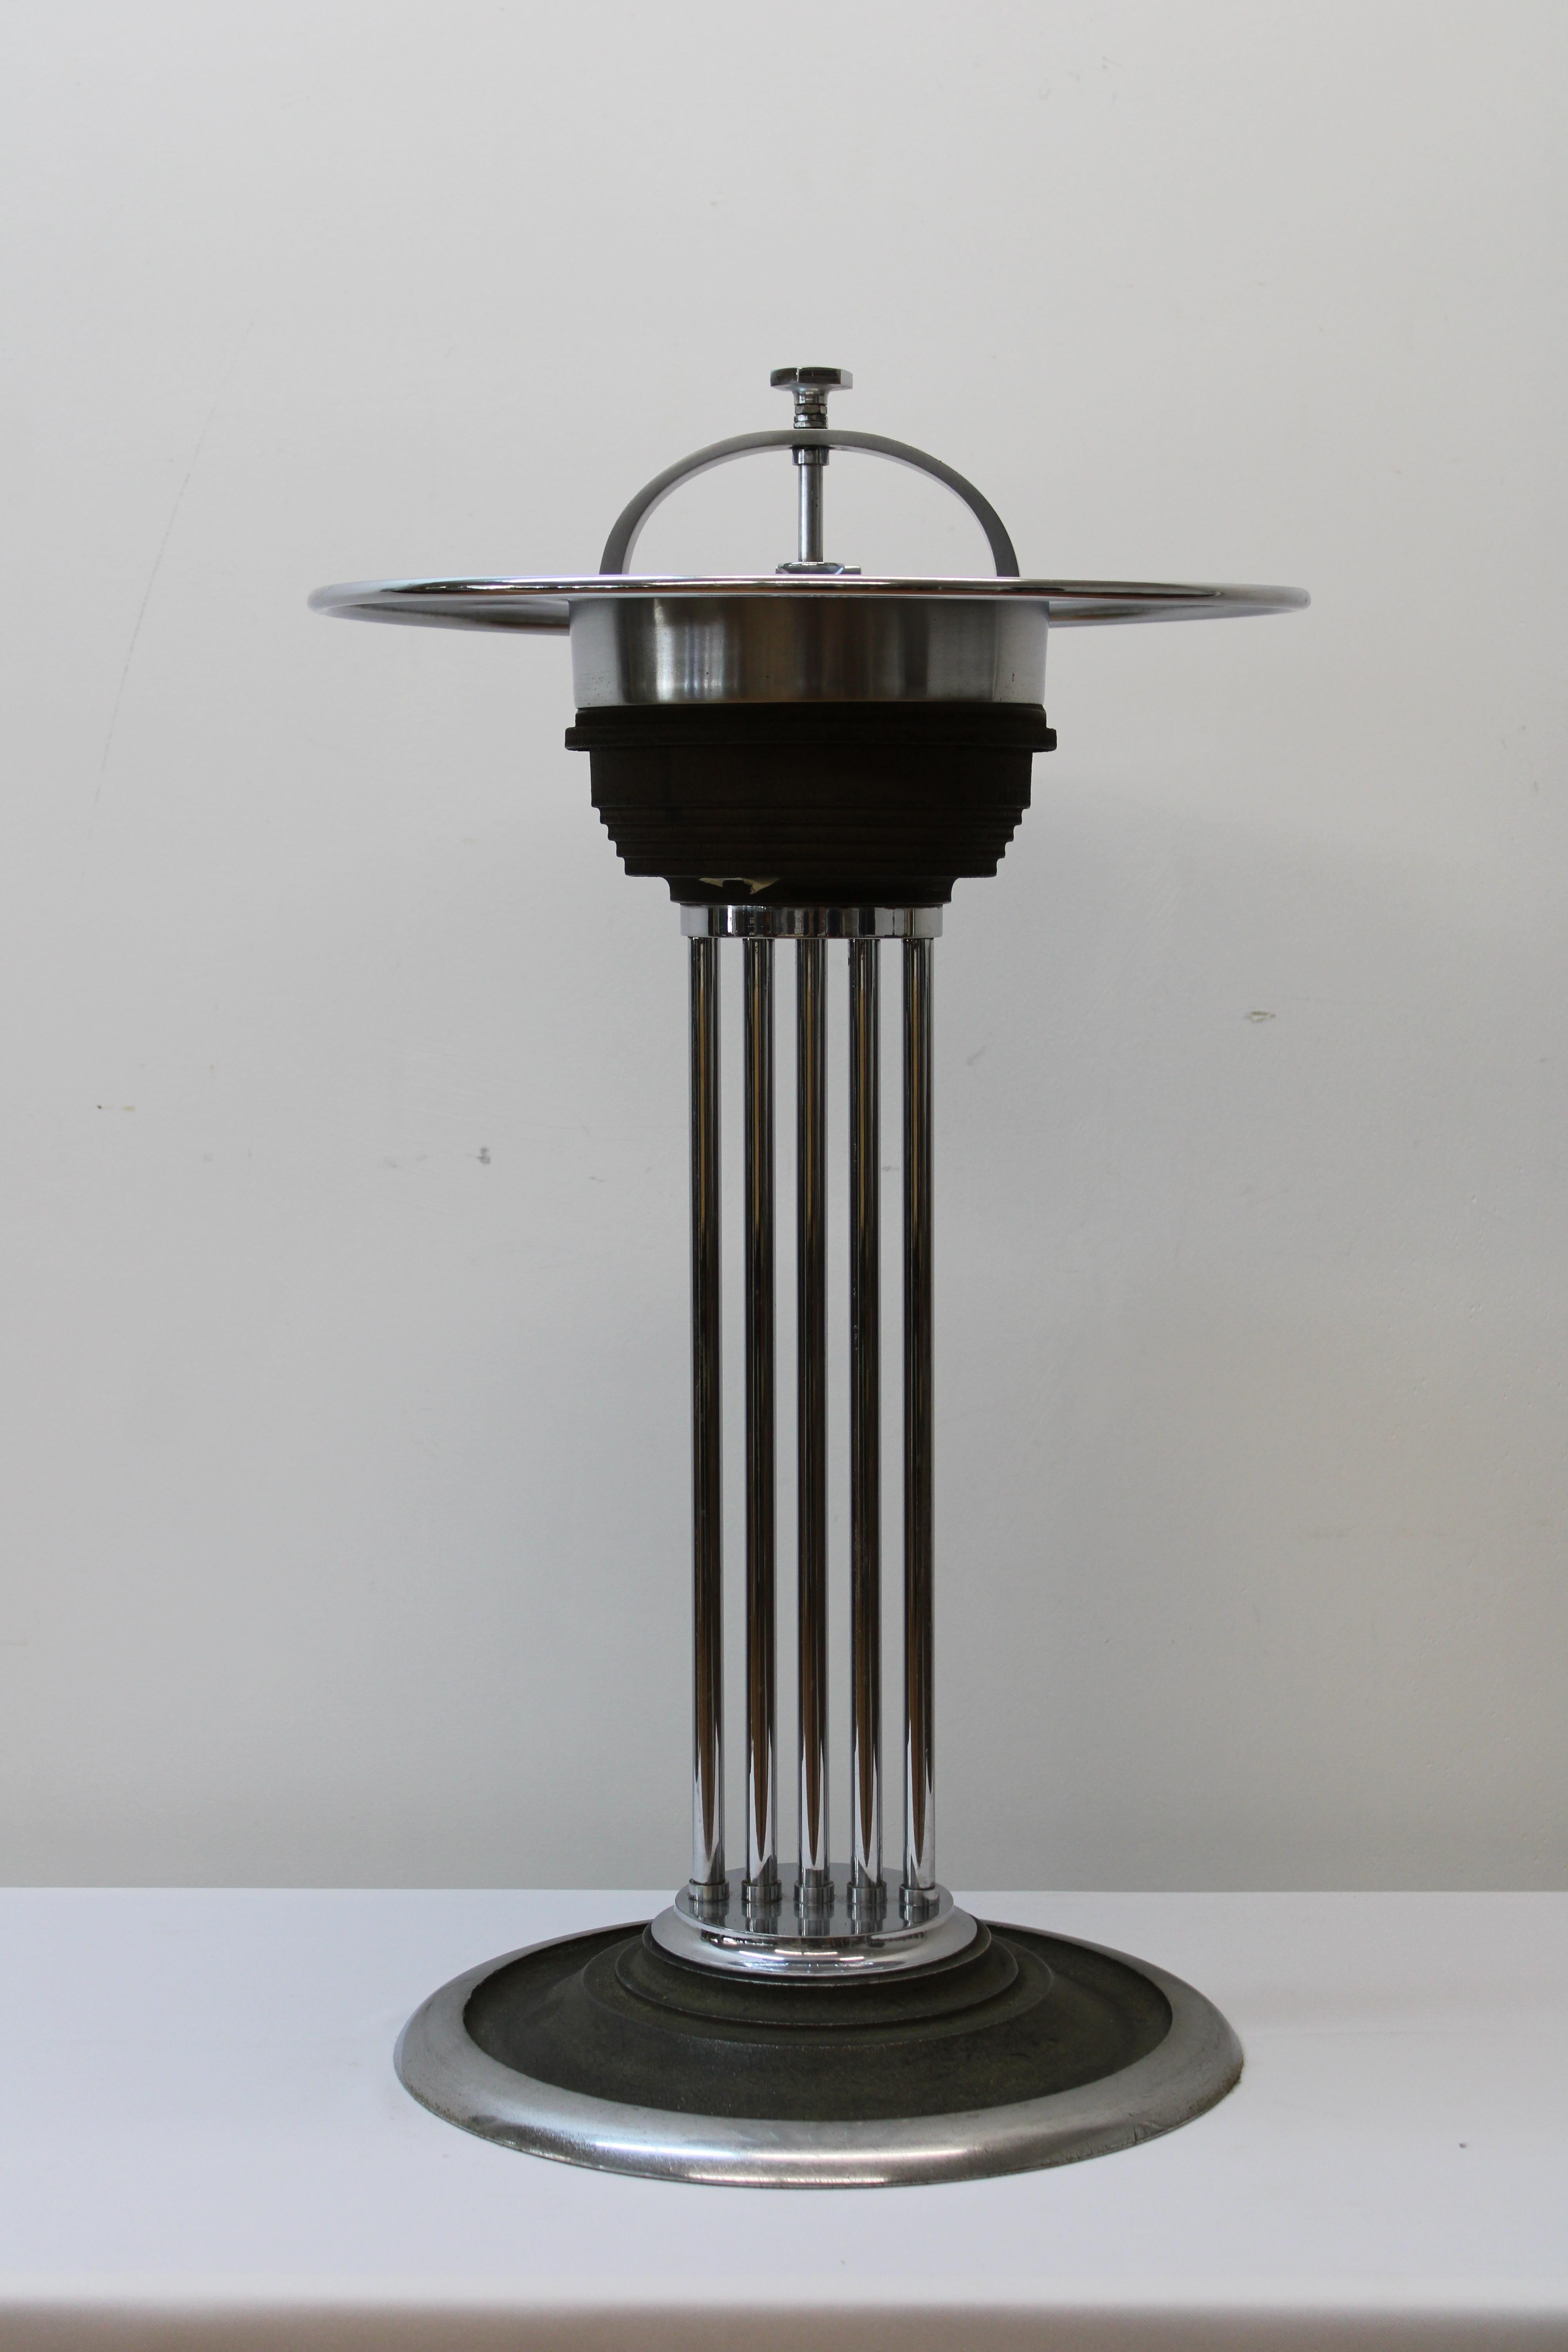 C. 20th Century

Art Deco Ashtray / Cocktail Smoker Stand Designed By W.J Campbell For Climax Machine Company.